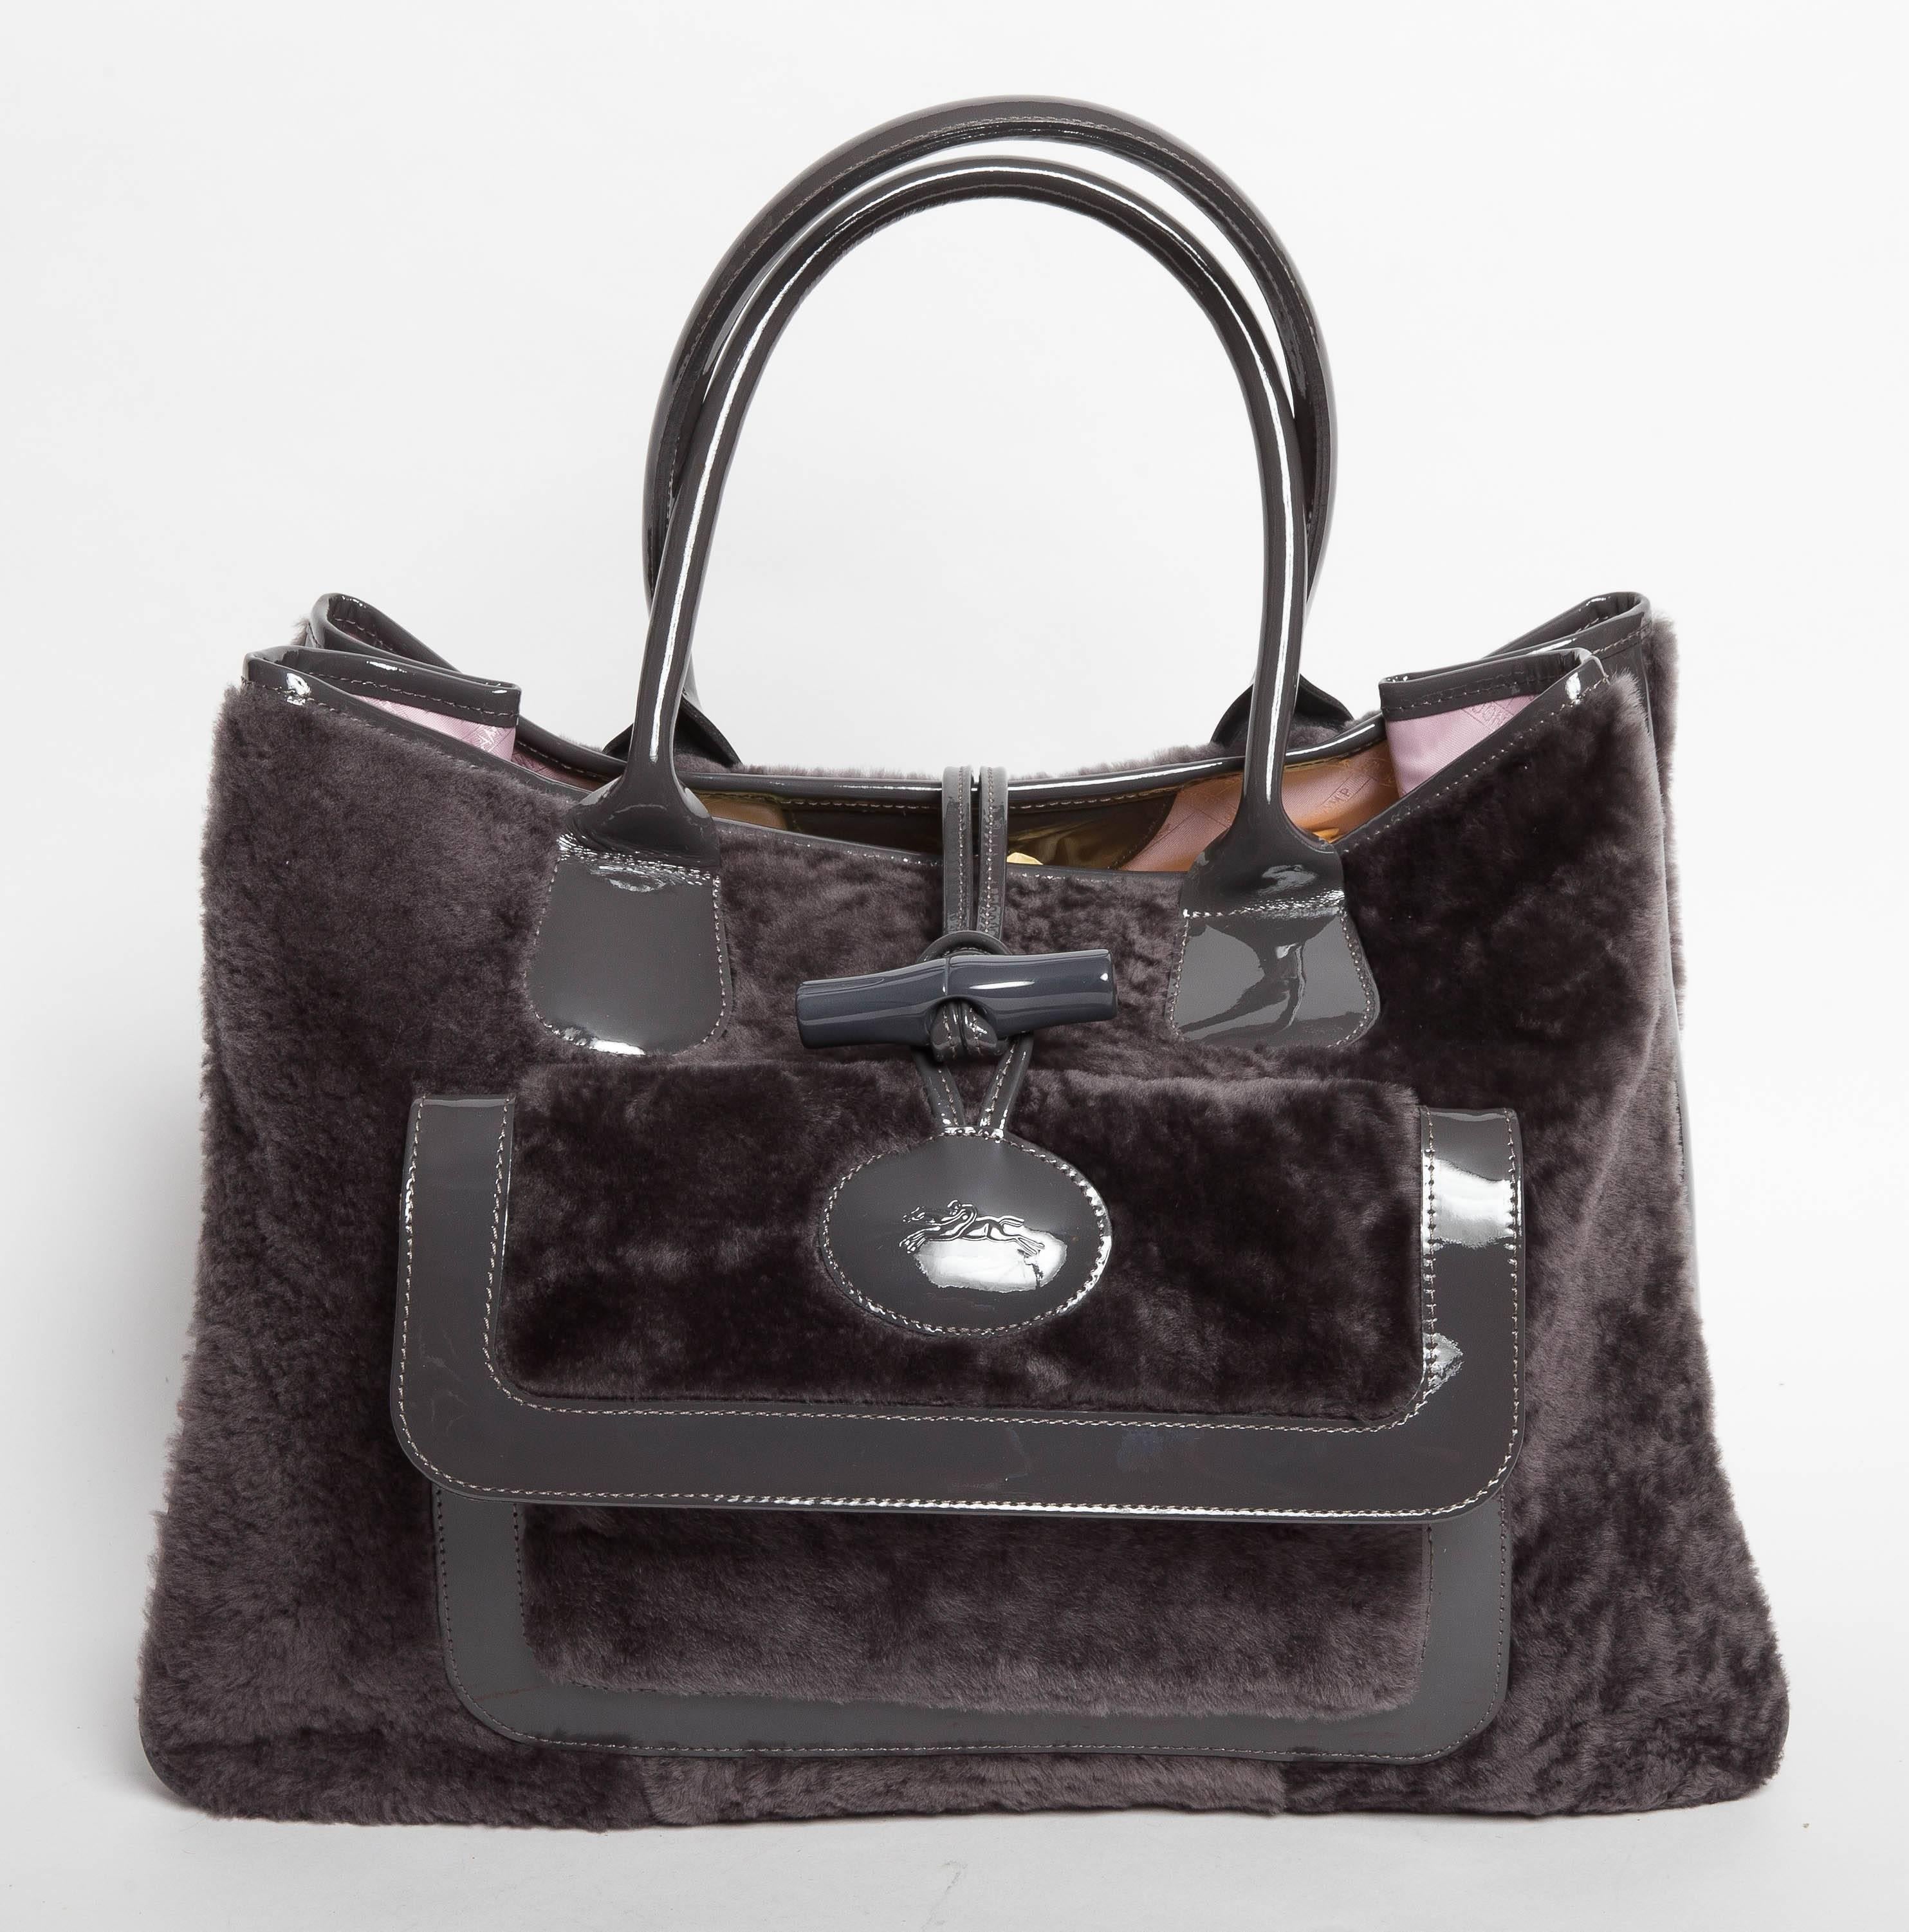 Beautiful shearling tote in grey with  patent trim and toggle closure. This tote is in excellent condition and features a large front exterior pocket as well as a large inner zip pocket. Nylon pink Longchamps lining is in immaculate condition and